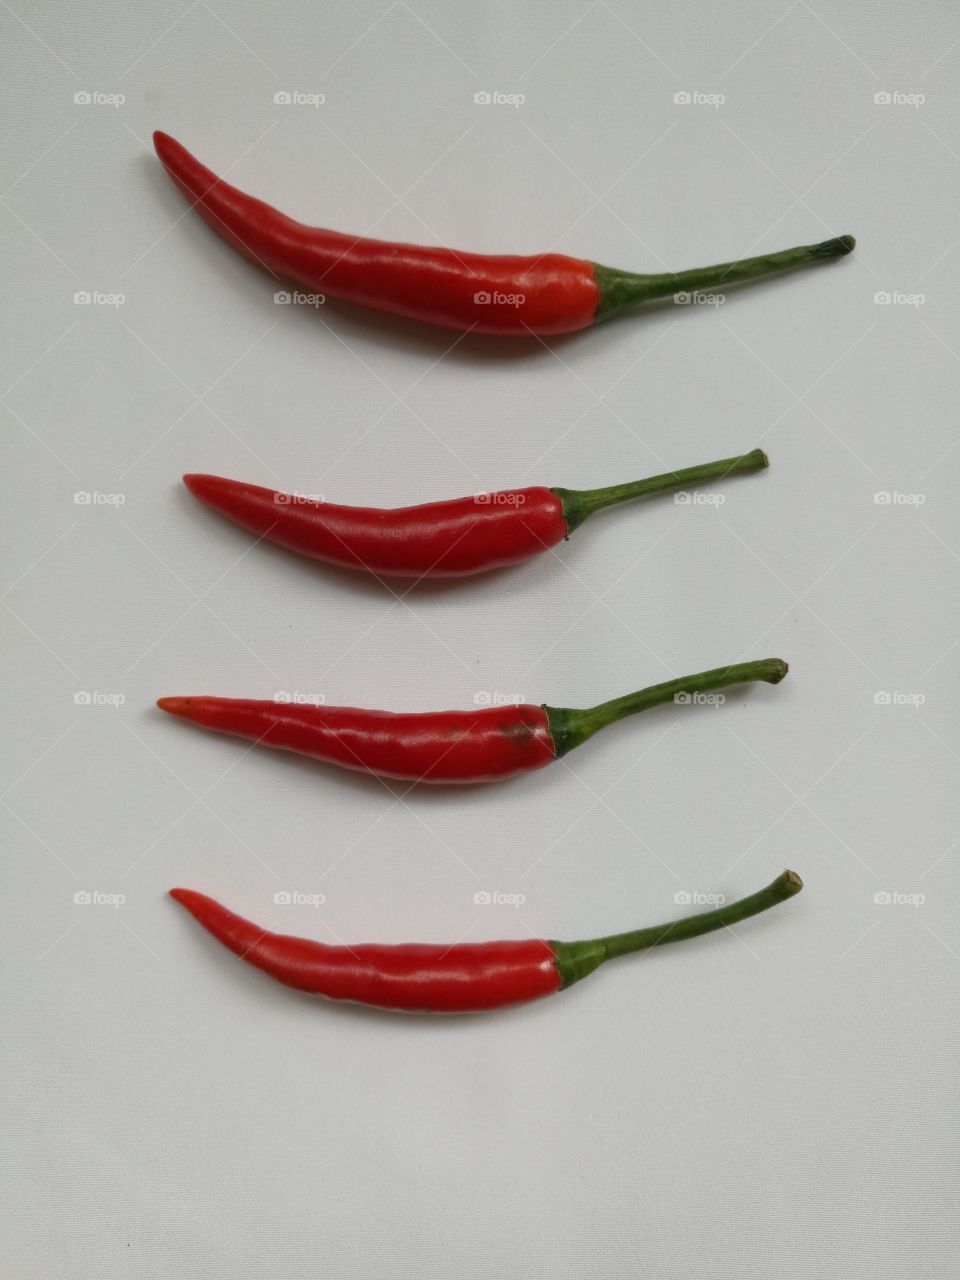 Top view of fresh red chilli peppers isolated on white background.